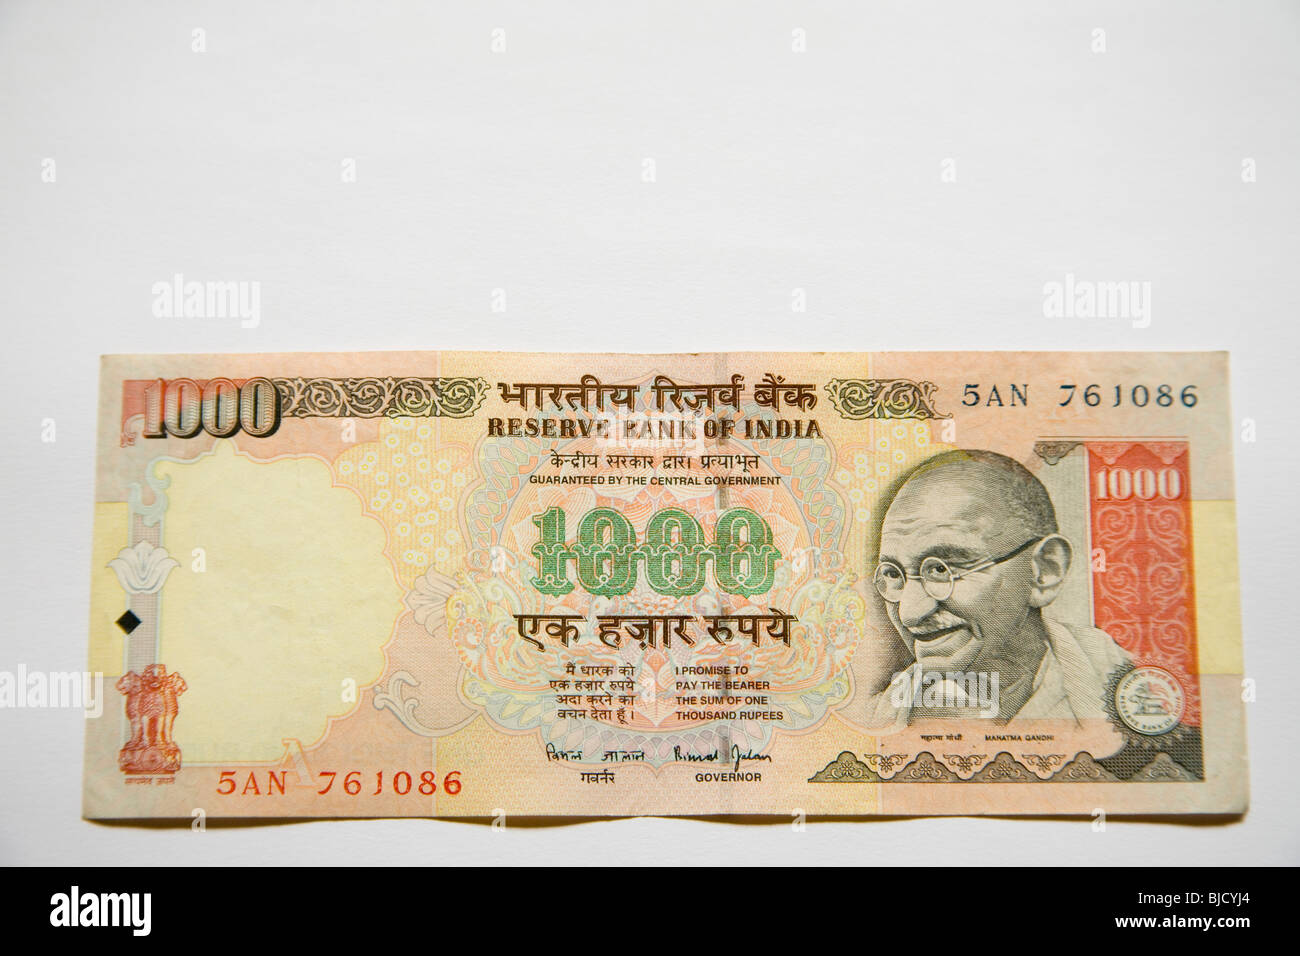 Indian currency one thousand rupee note Reserve Bank Government of India show front side Stock Photo